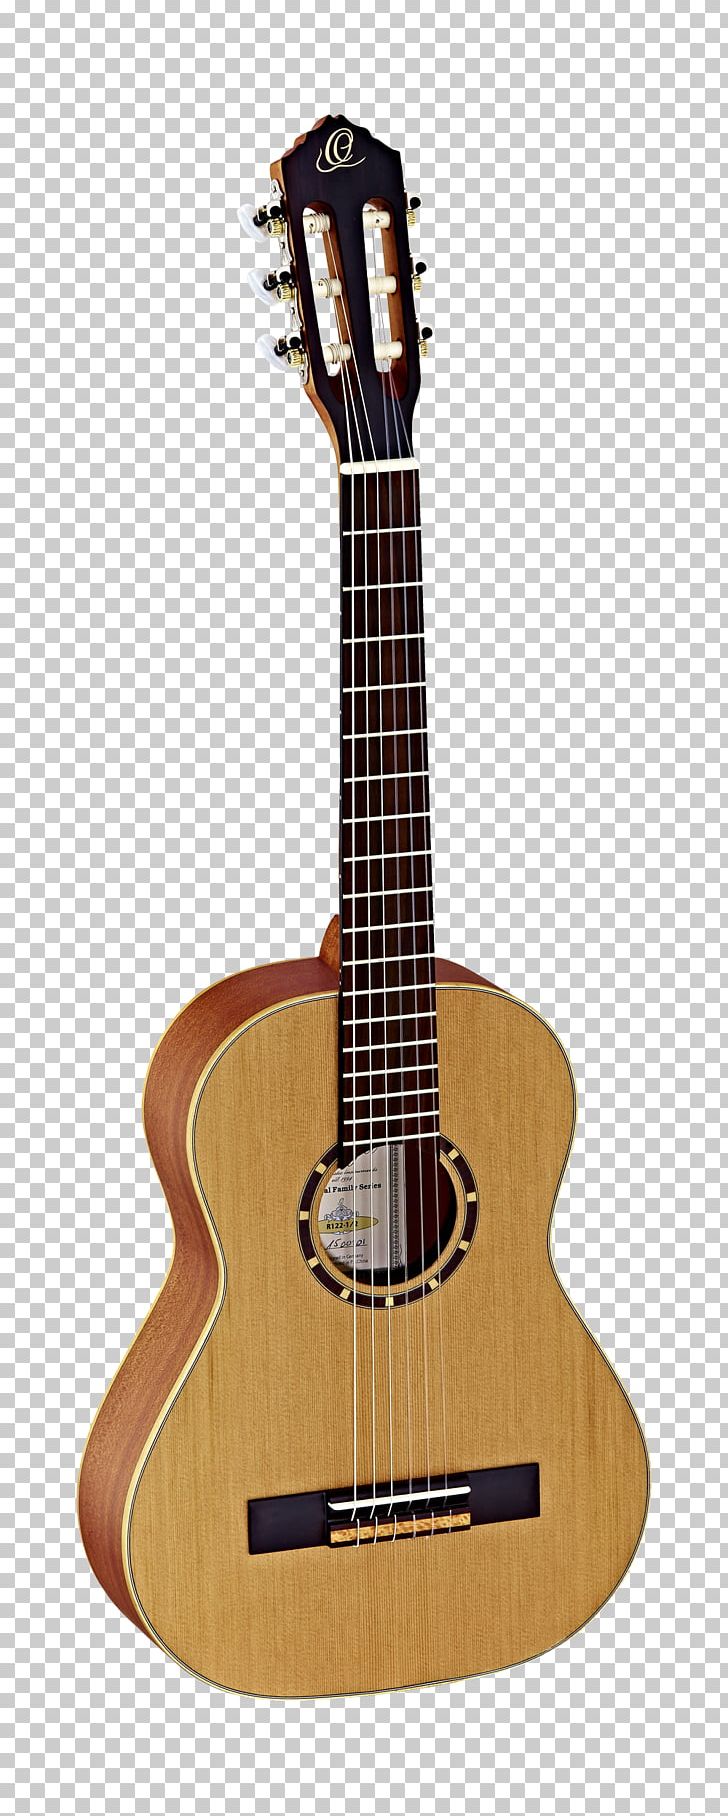 Classical Guitar Gig Bag Musical Instruments Acoustic Guitar PNG, Clipart, Acoustic Electric Guitar, Acoustic Guitar, Amancio Ortega, Bridge, Classical Guitar Free PNG Download